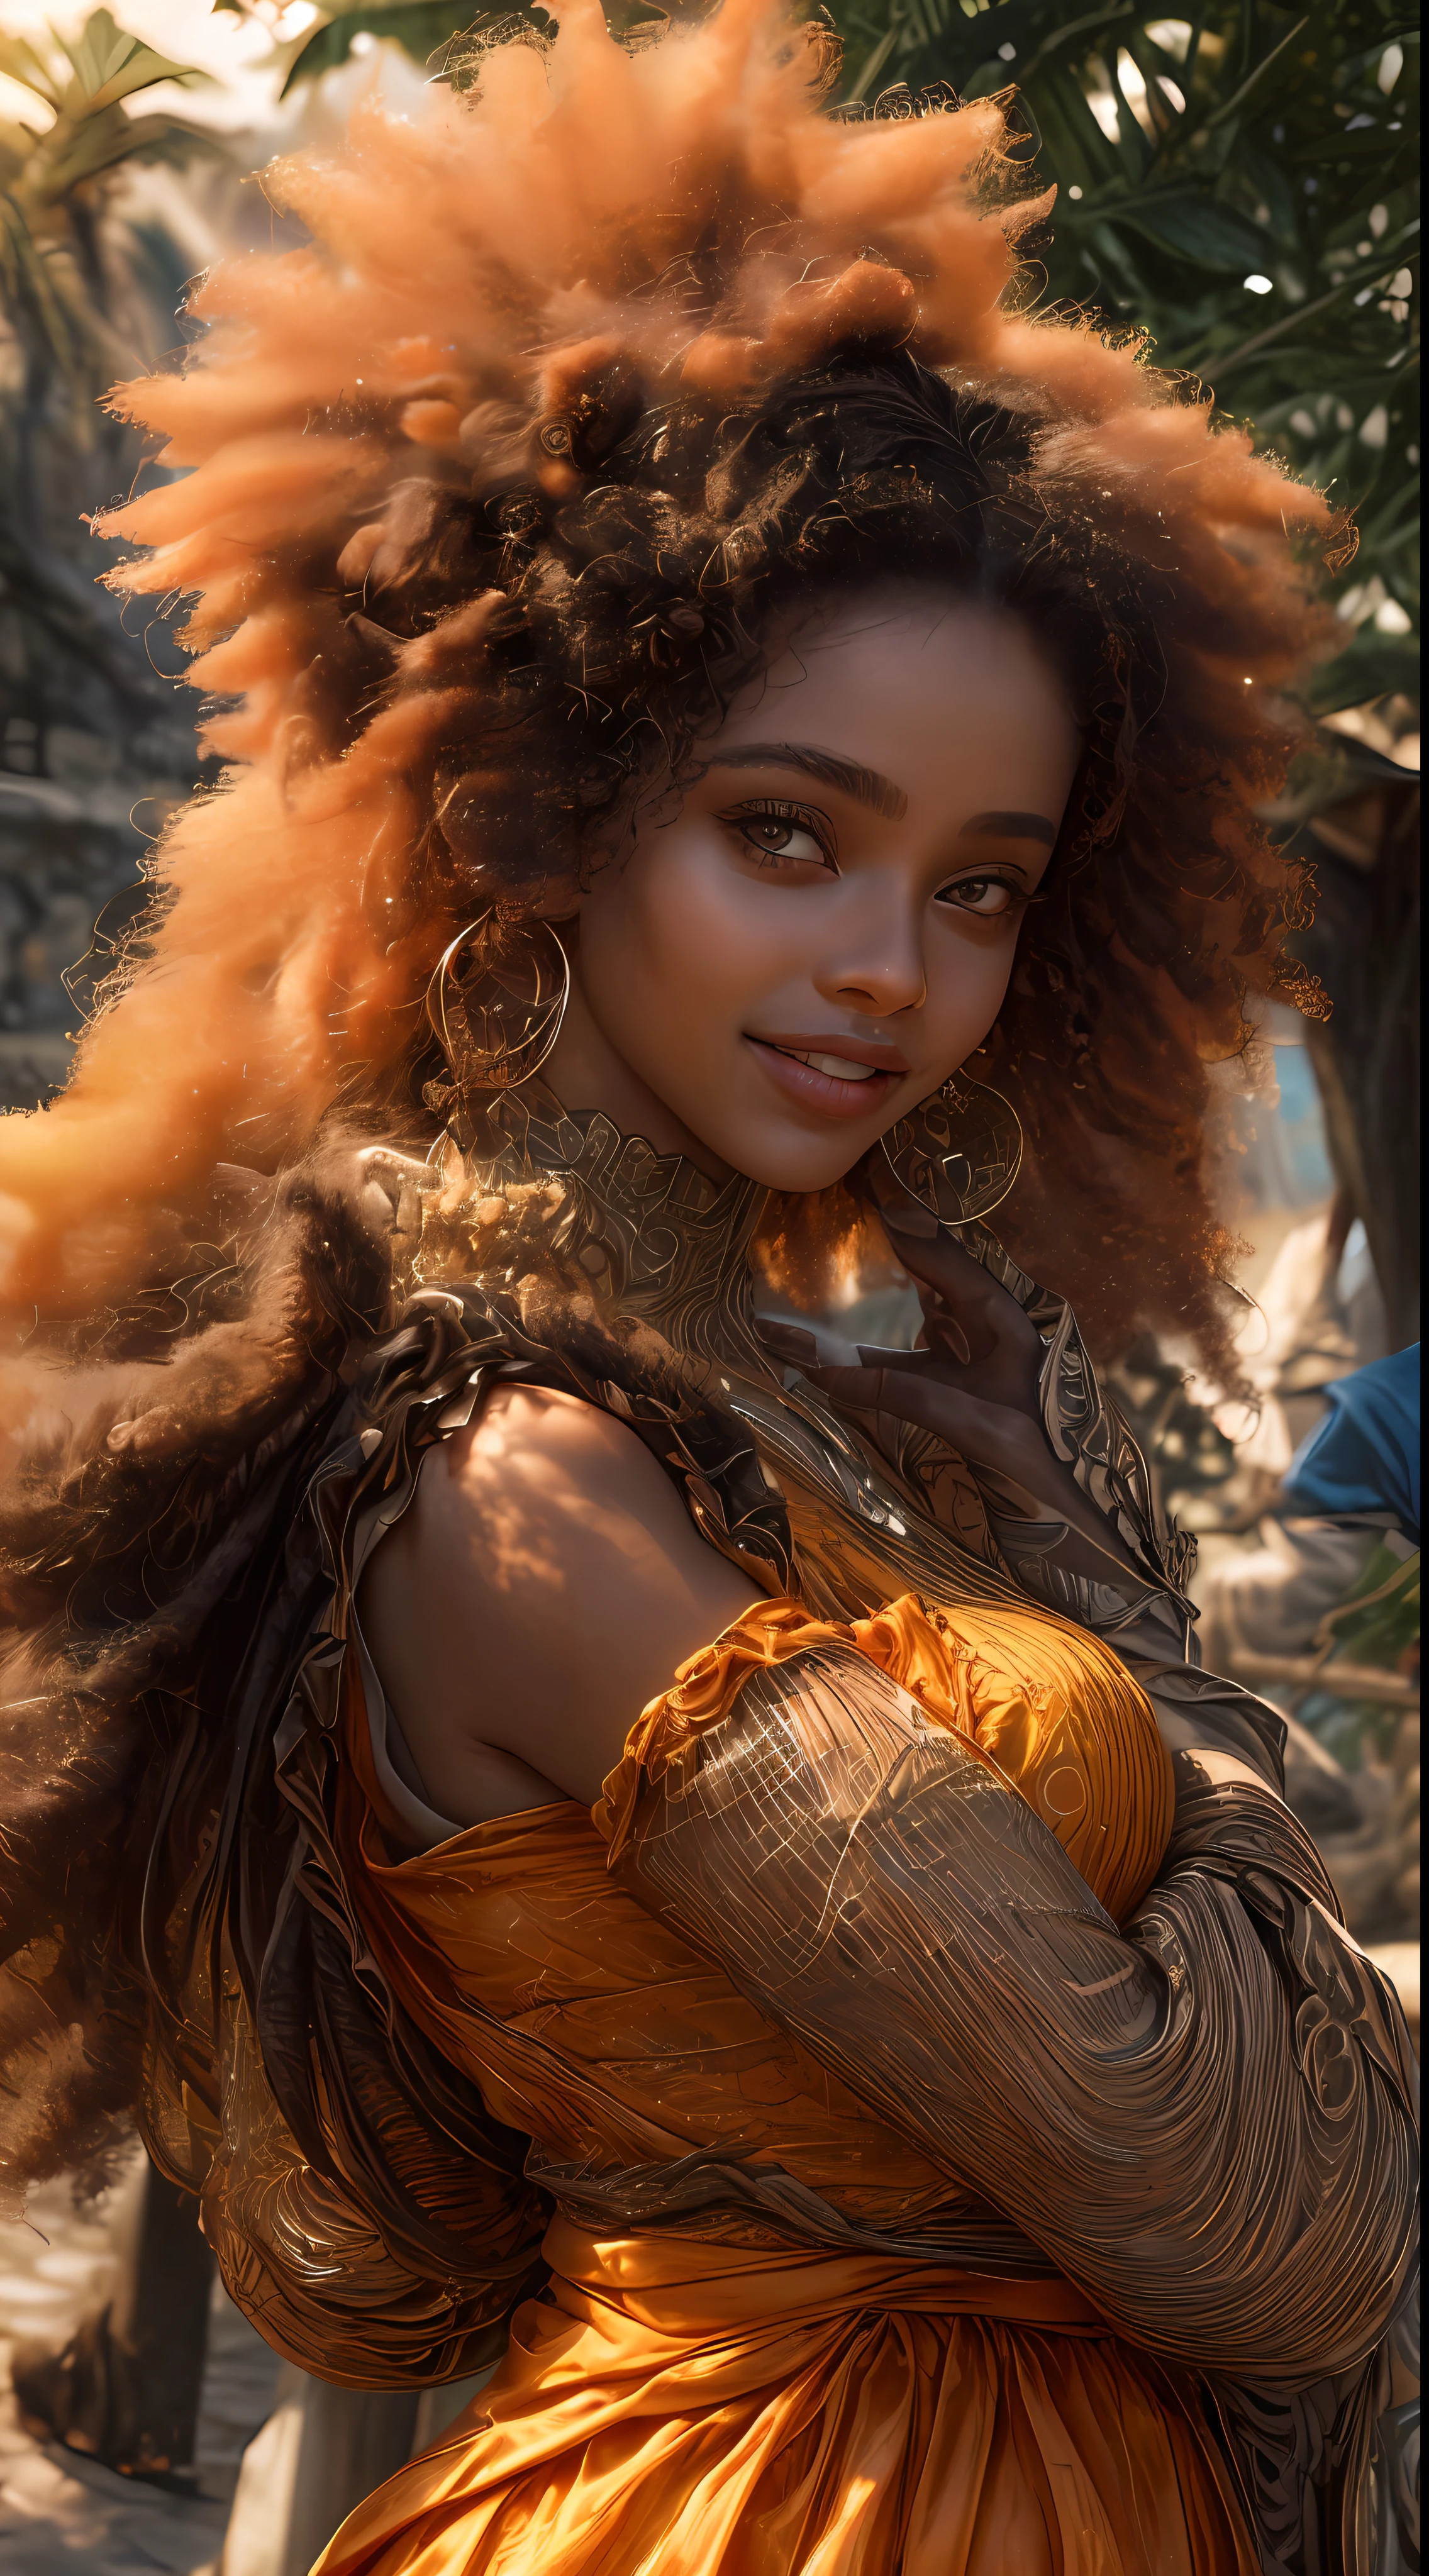 A close-up of an African-American woman&#39;s face, bathed in warm shades of orange, as if illuminated by the soft glow of a sunset, your eyes shining with joy and contentment, framed by flowing strands of hair, fot, photographed with a 35mm lens